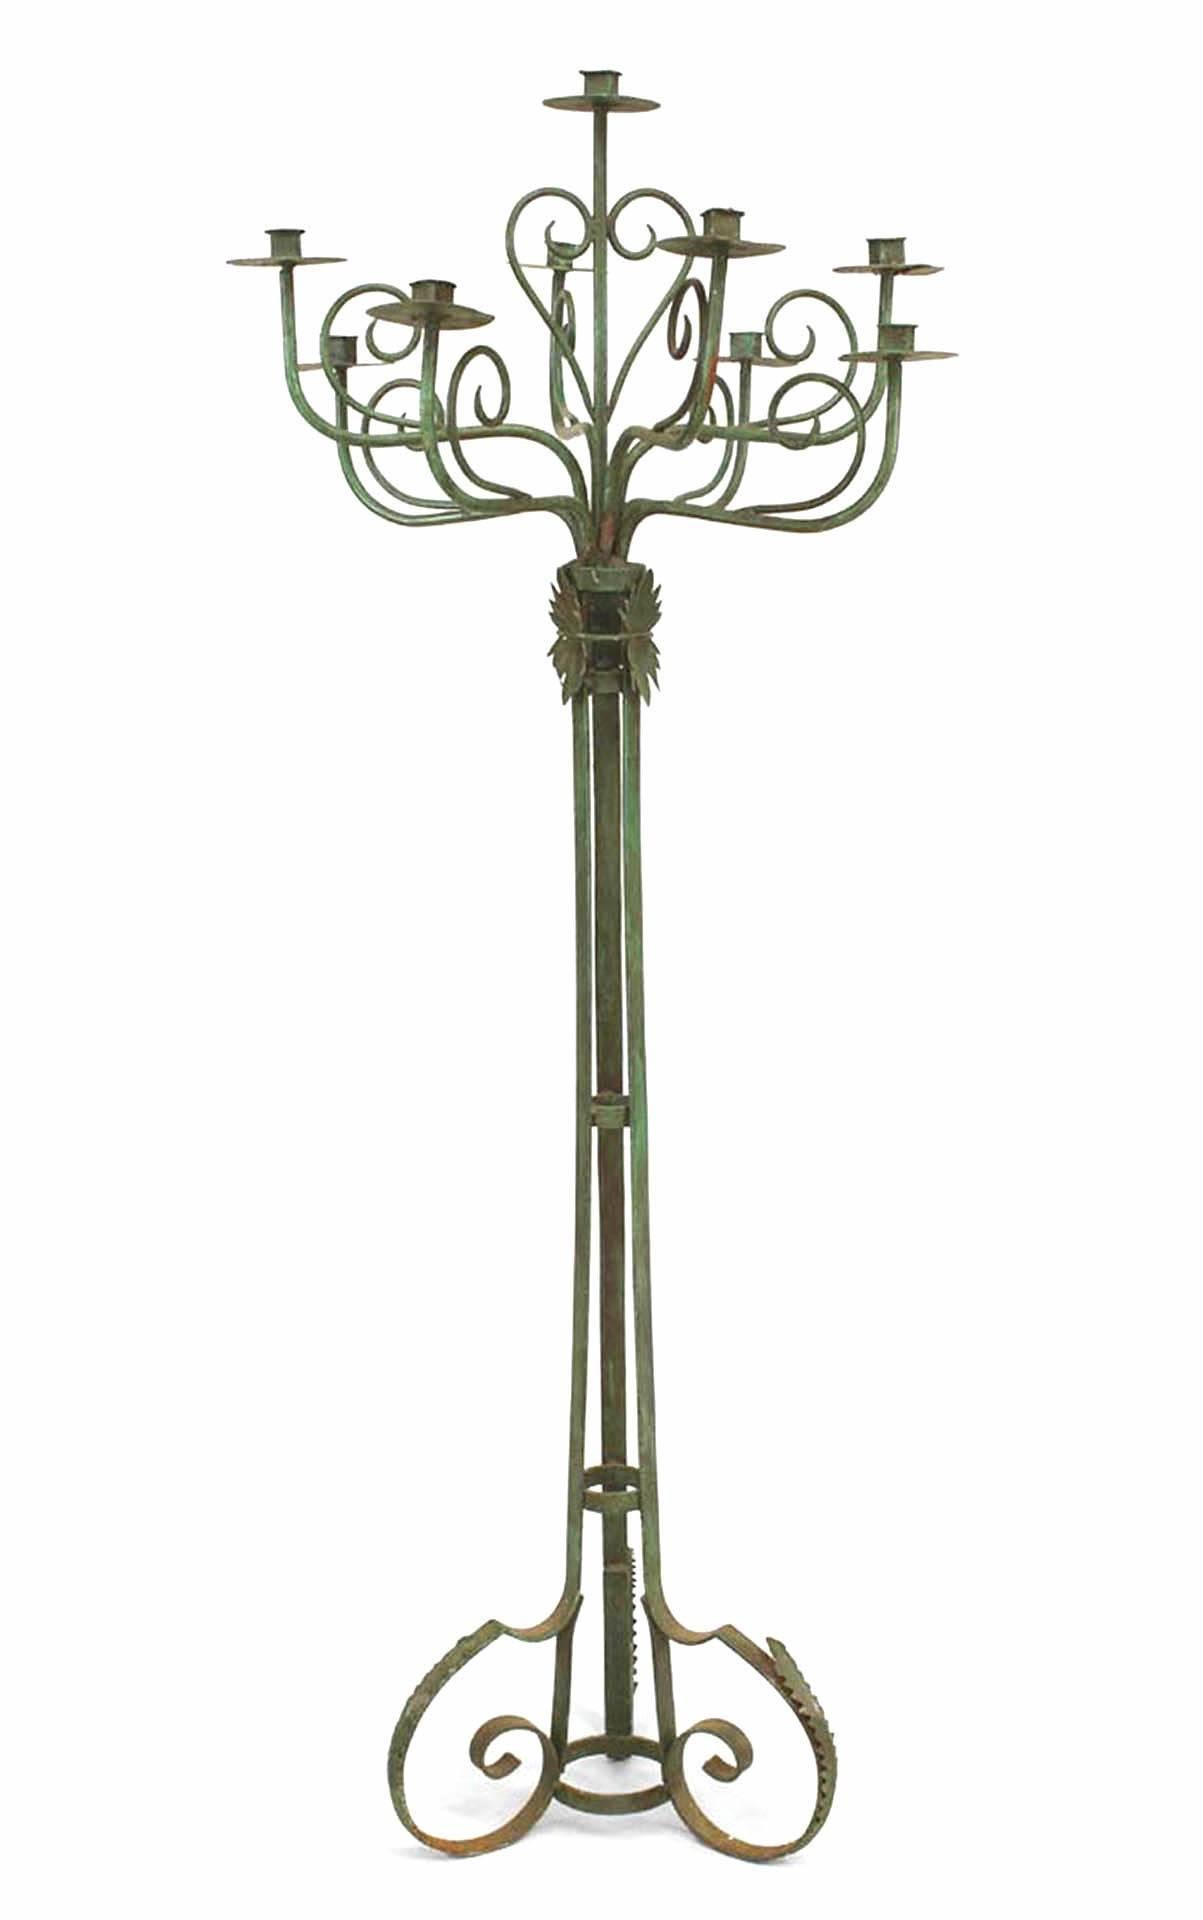 Pair of English Renaissance-style (19/20th Century) green patinated wrought iron floor torchiere with 10 scroll arms on triple scroll design base (PRICED AS Pair).
